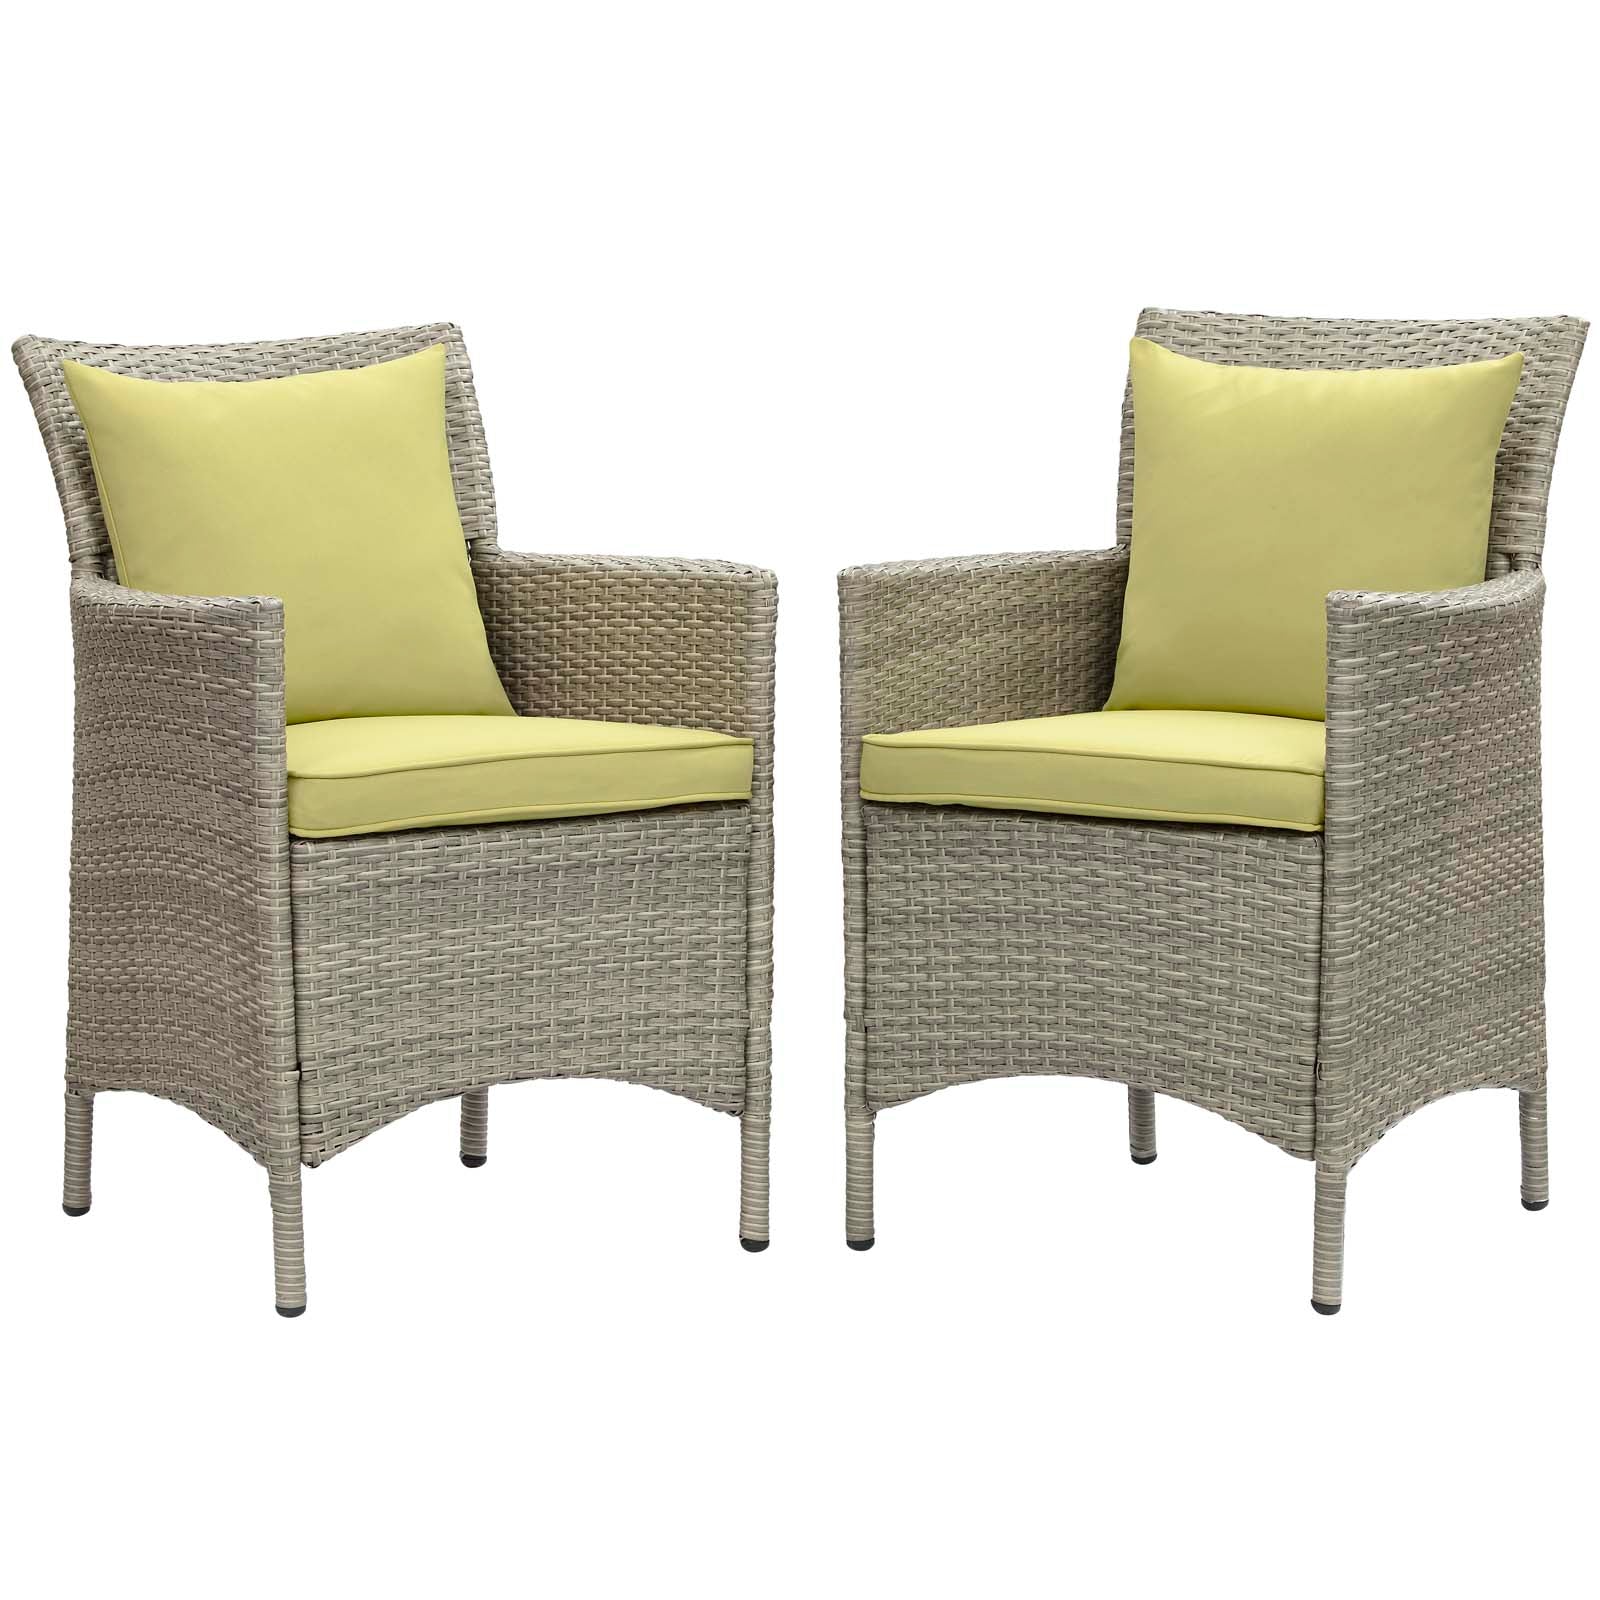 Modway Outdoor Dining Chairs - Conduit Outdoor Patio Wicker Rattan Dining Armchair Set of 2 Light Gray Peridot